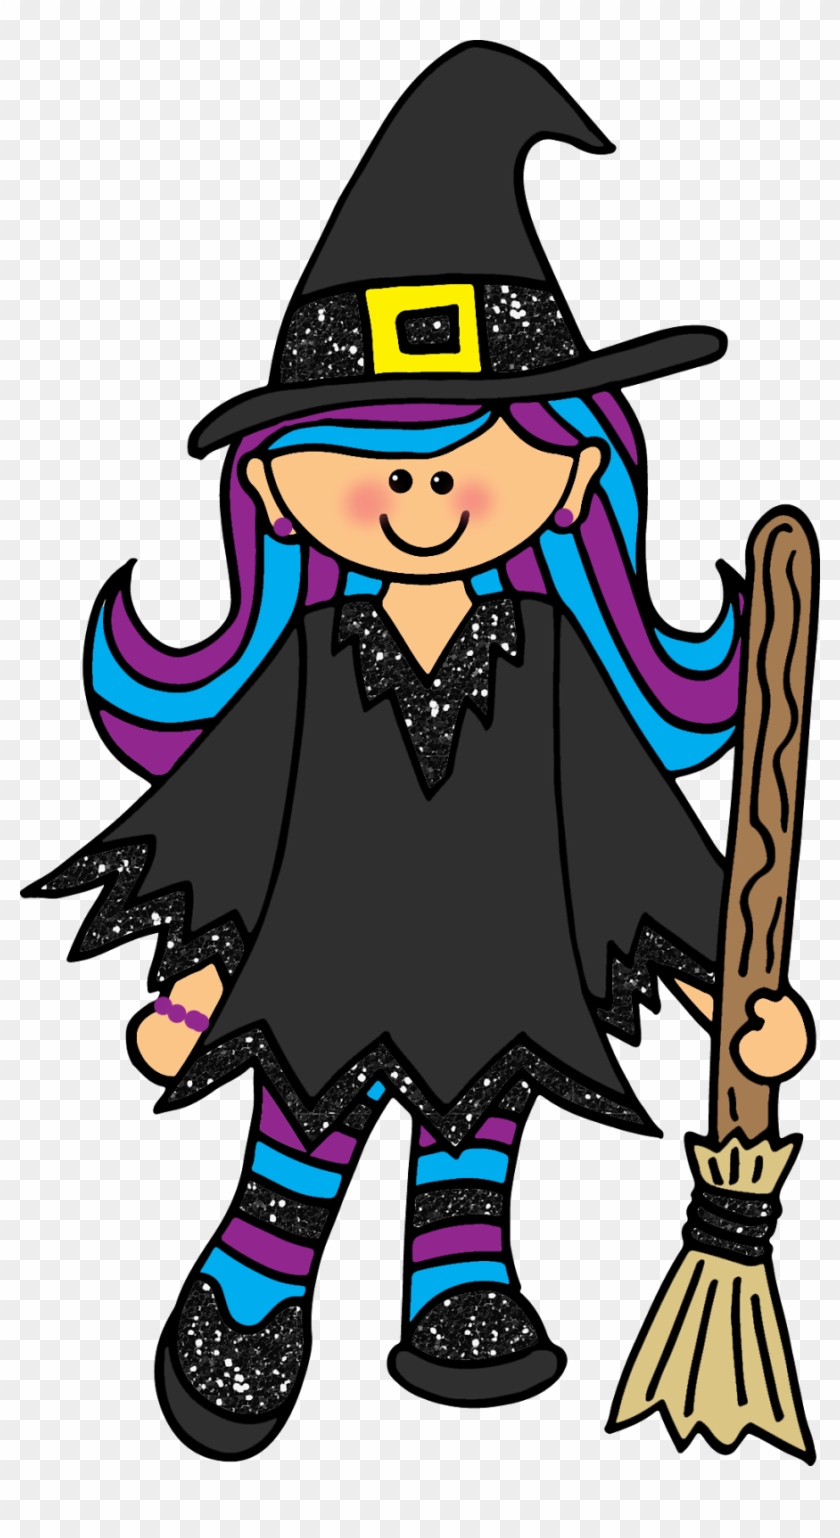 Friendly Witch Clipart - Friendly Witch #52212